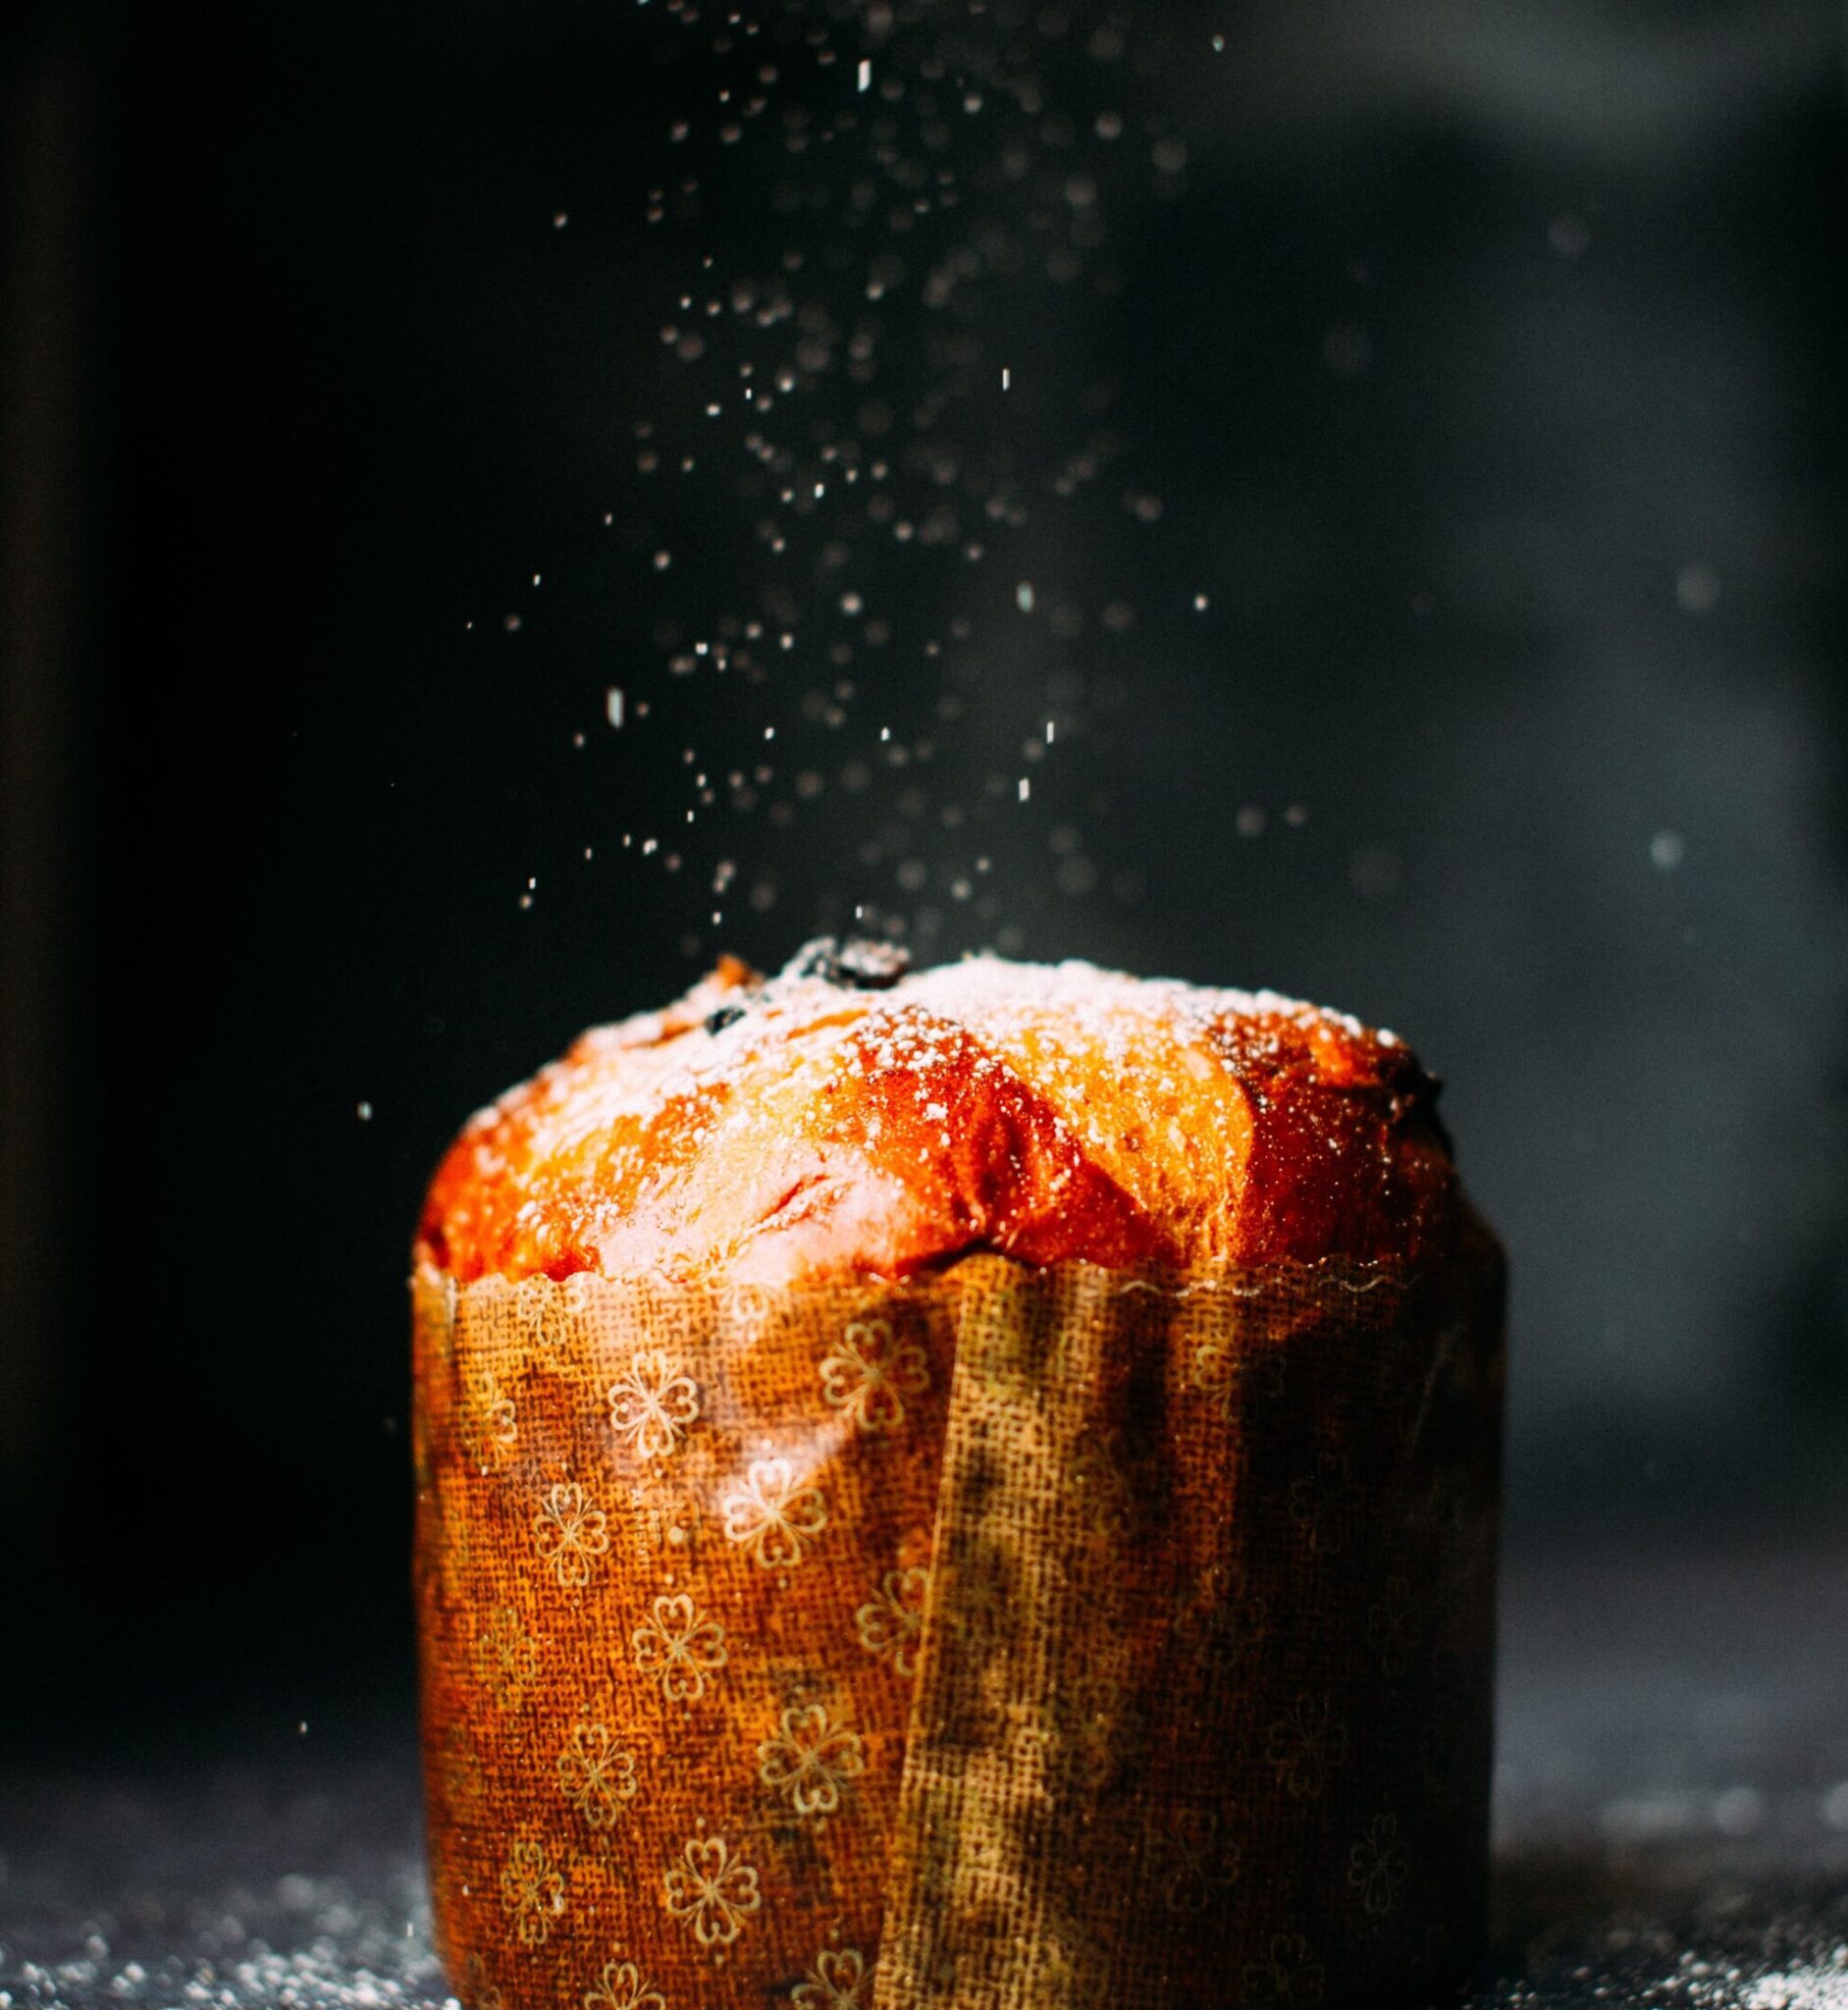 A typical Milanese dessert: Panettone